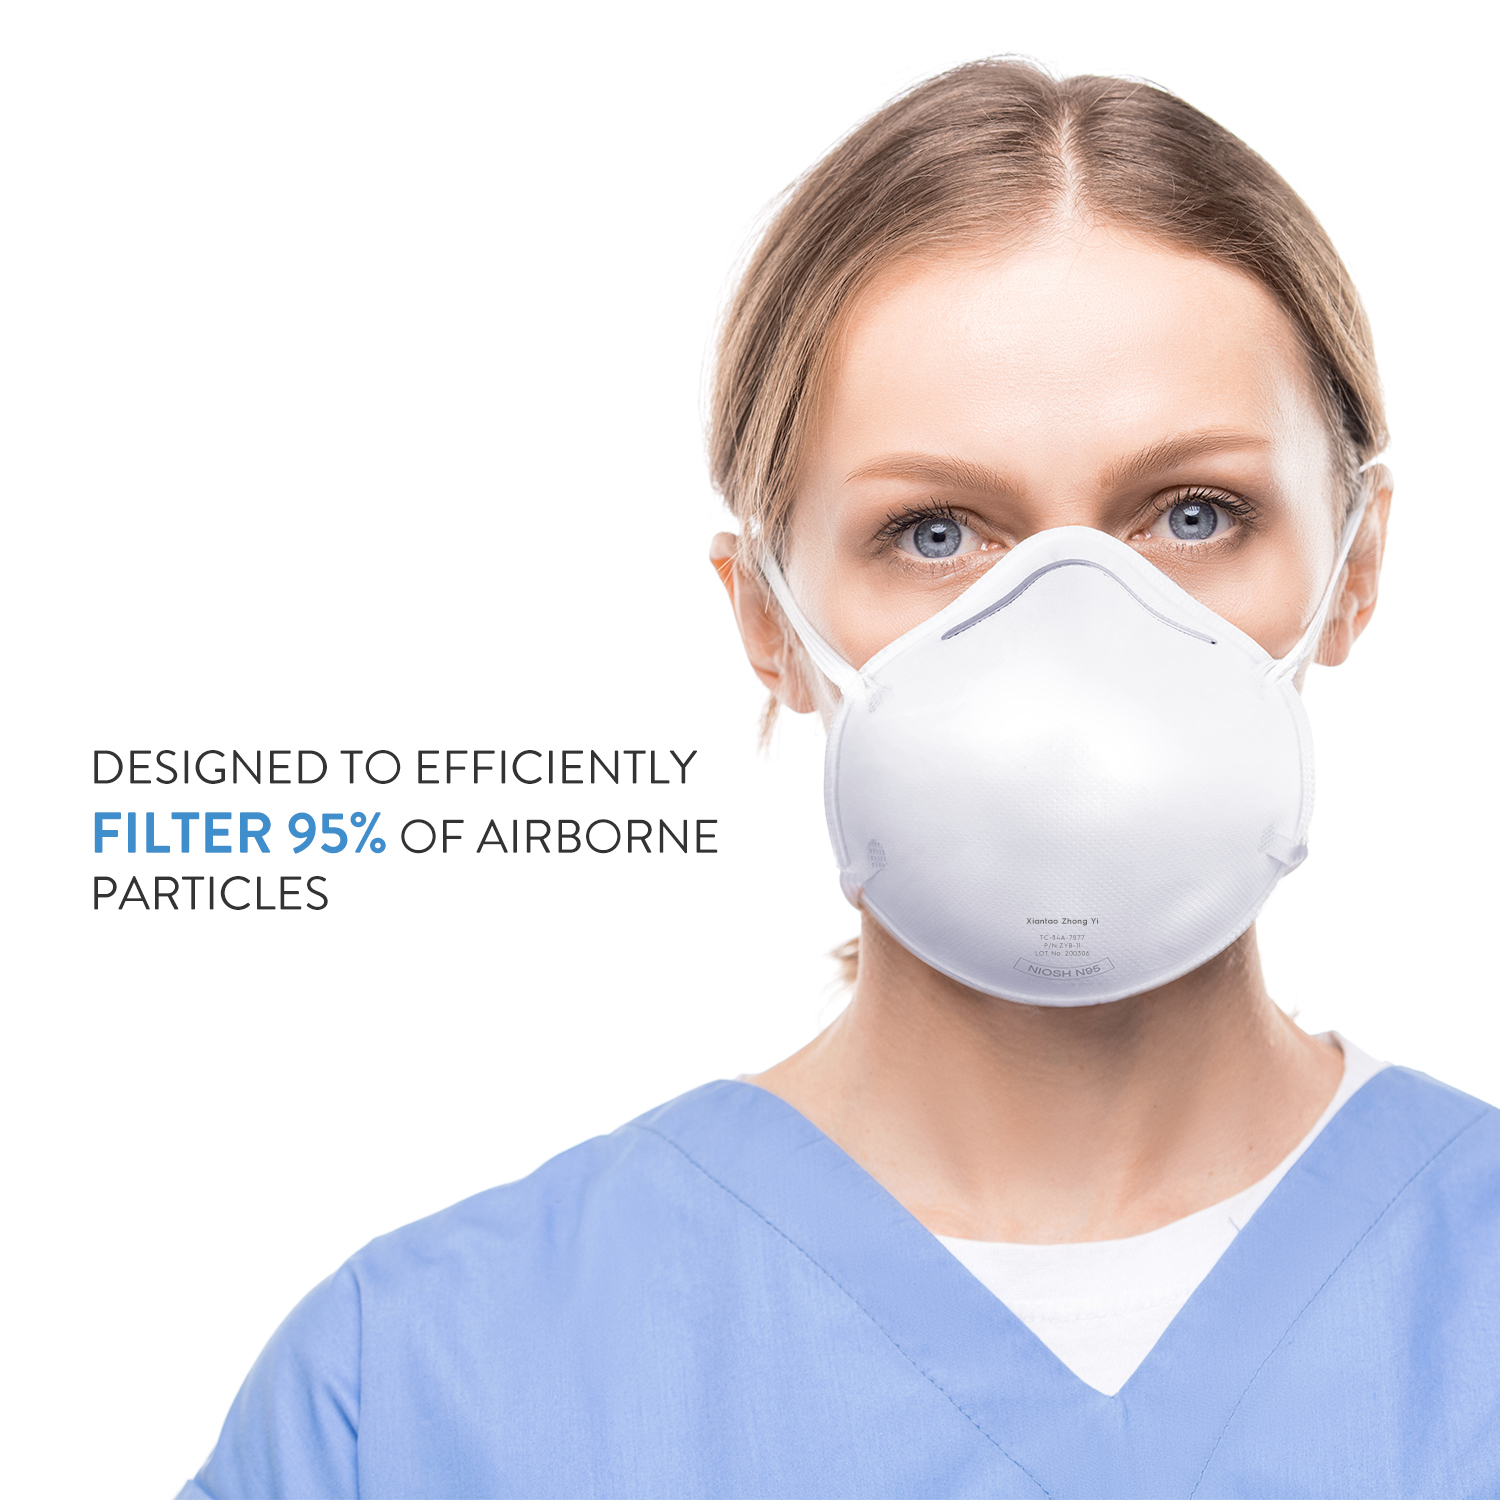 KN95 Mask vs N95 Mask – Current FDA Guidelines Surrounding COVID-19 Pandemic